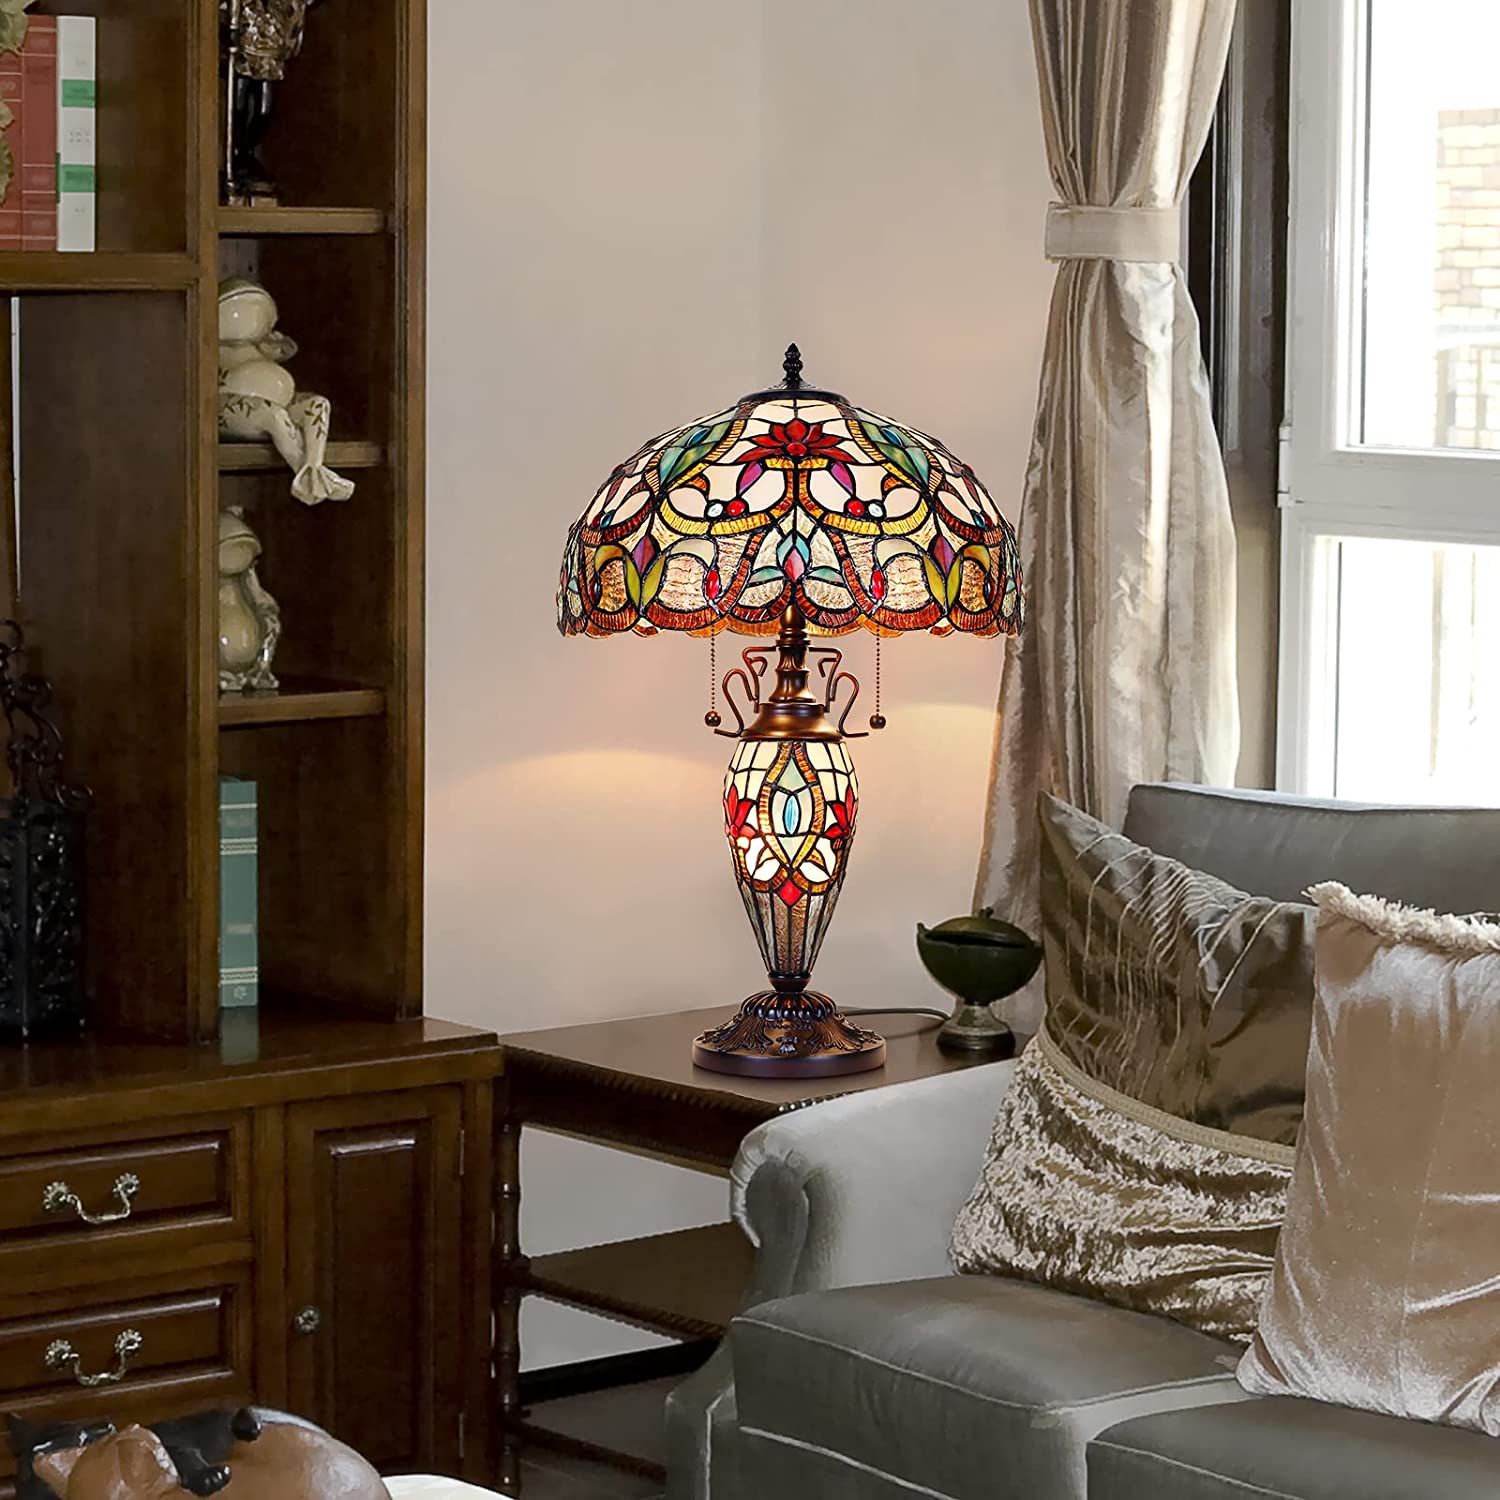 MOOVIEW  Lamp Night Light Stained Glass  Table Lamp 24\u2019\u2019 Tall Vintage Living Room Bedroom  Office Bedside Reading Lamp 3 LED Bulb Included  Orange Christmas Gift